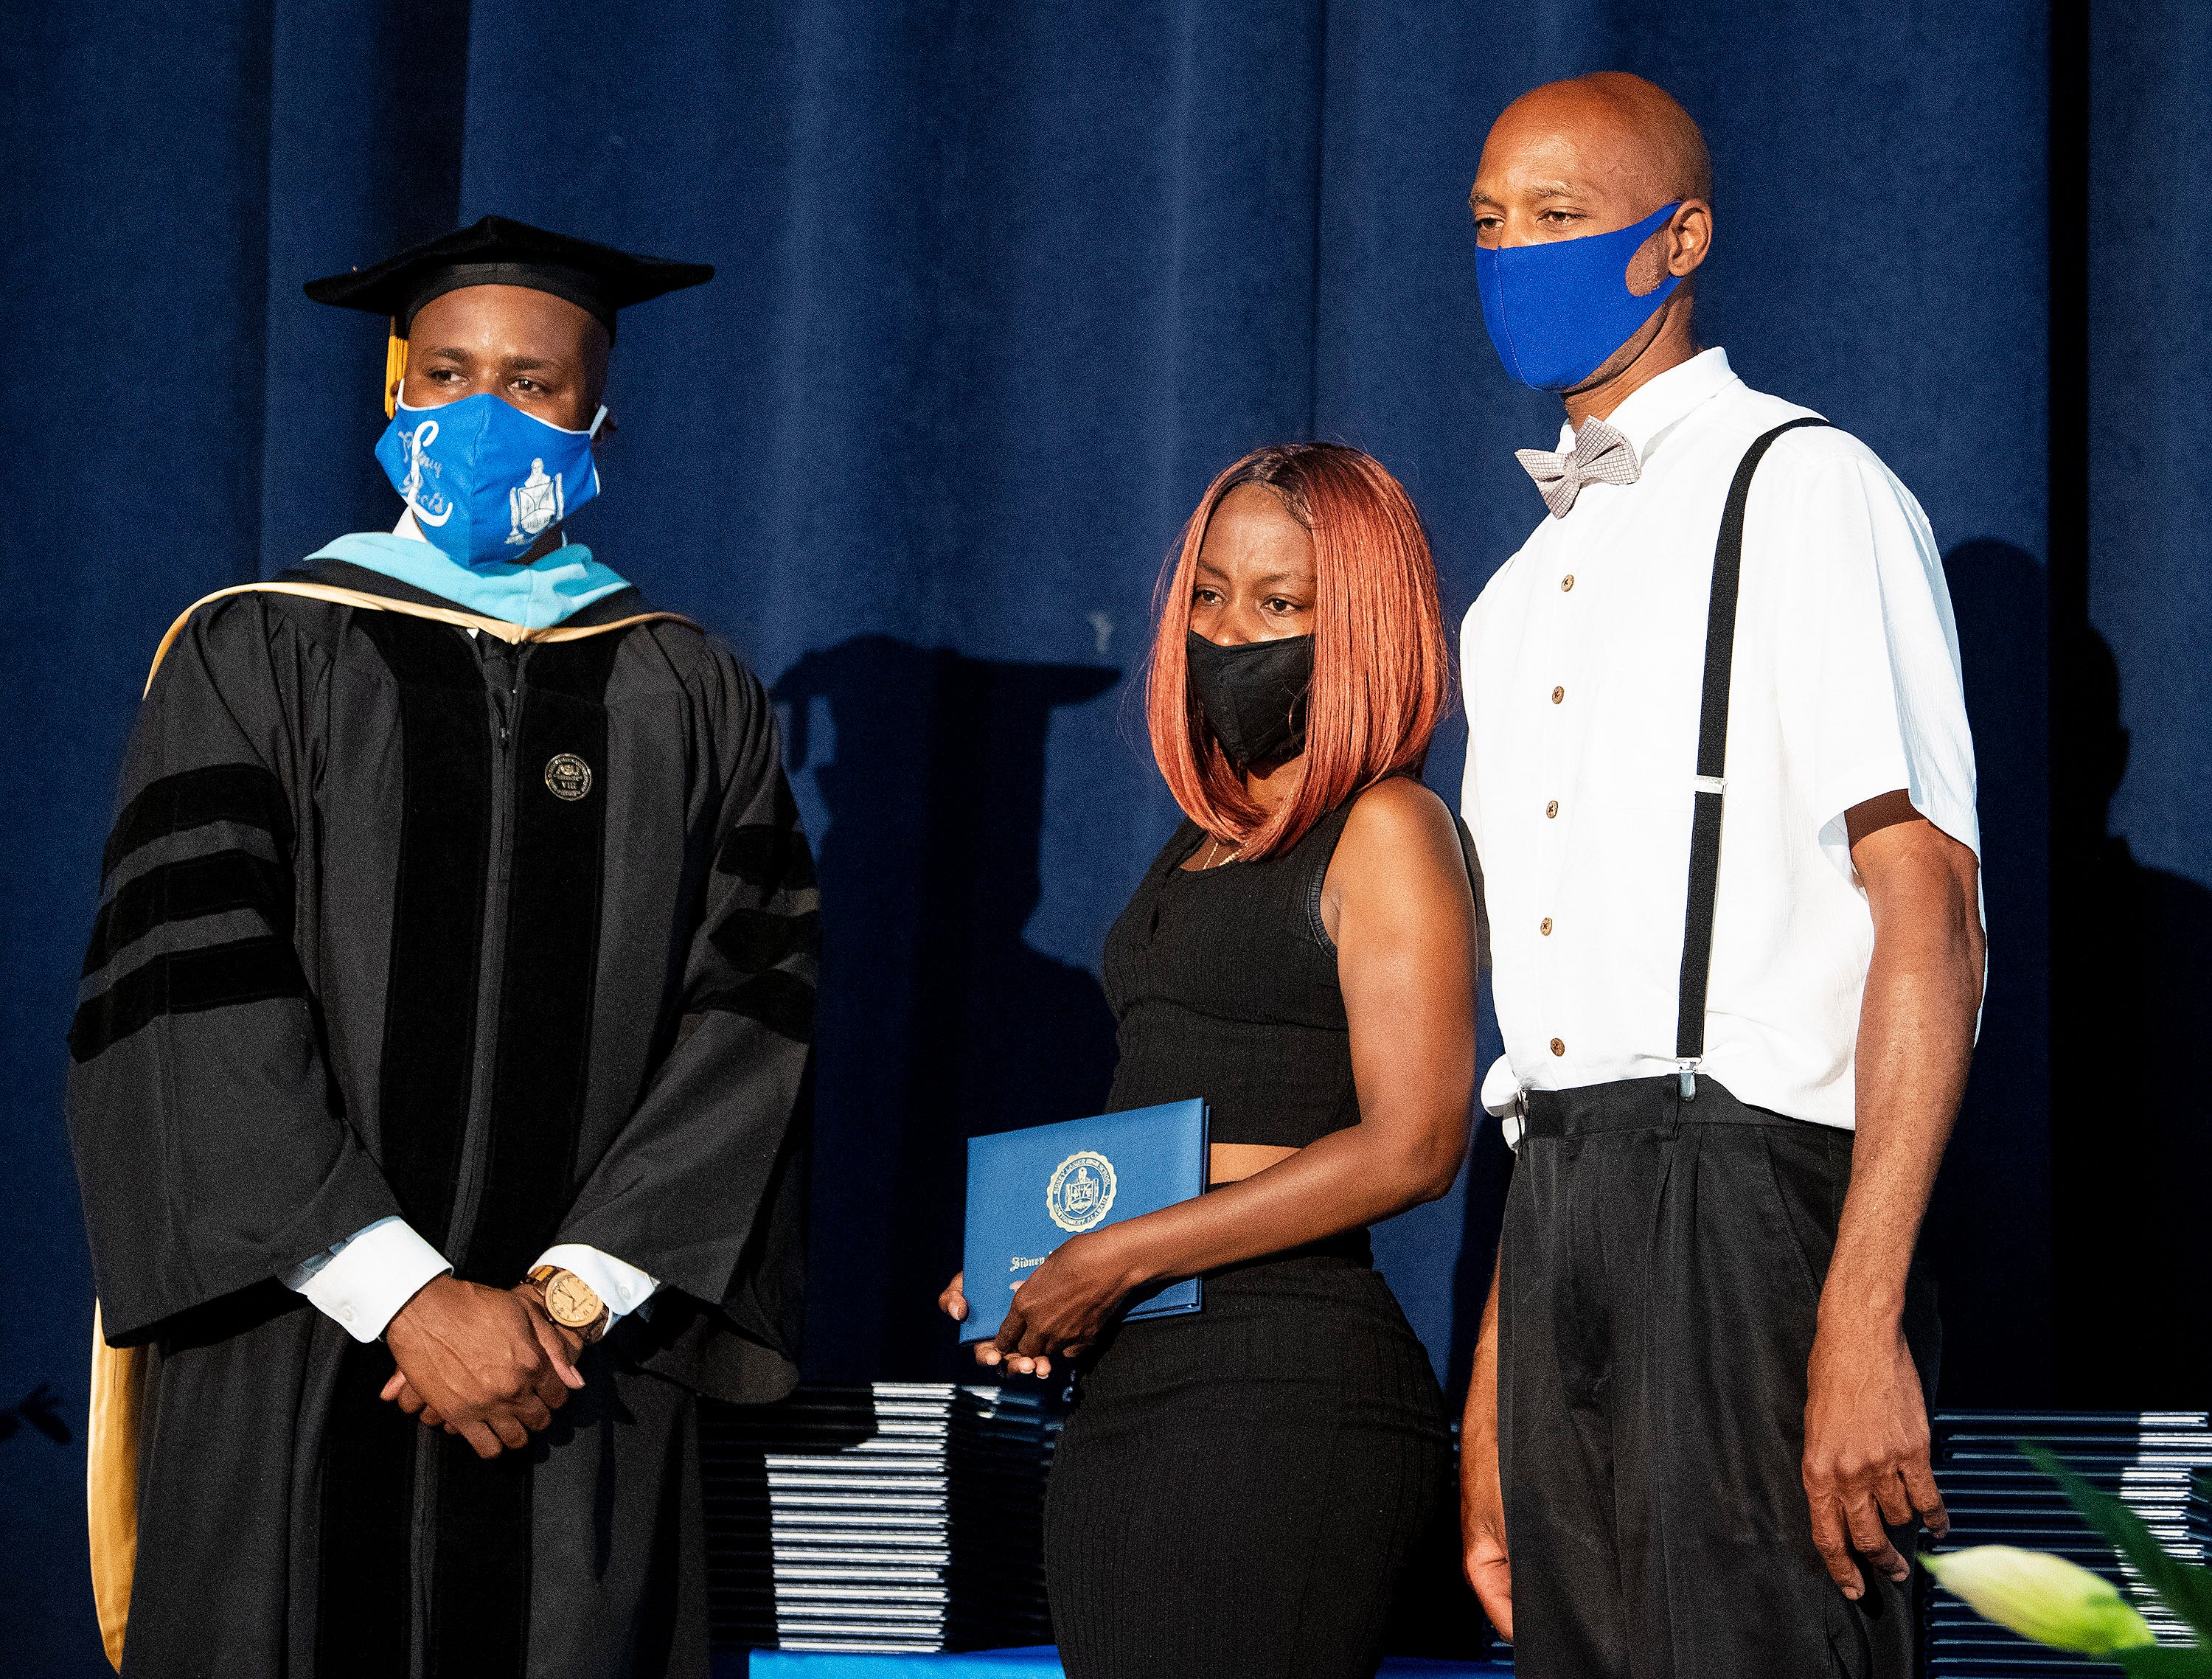 Lanier High School Principal Antonio Williams gives an honorary degree to the parents of slain Lanier student Courtney Jones as the school holds graduation exercises in the auditorium at the school in Montgomery, Ala., on Friday June 5, 2020. The graduation was distanced because of the coronavirus outbreak.